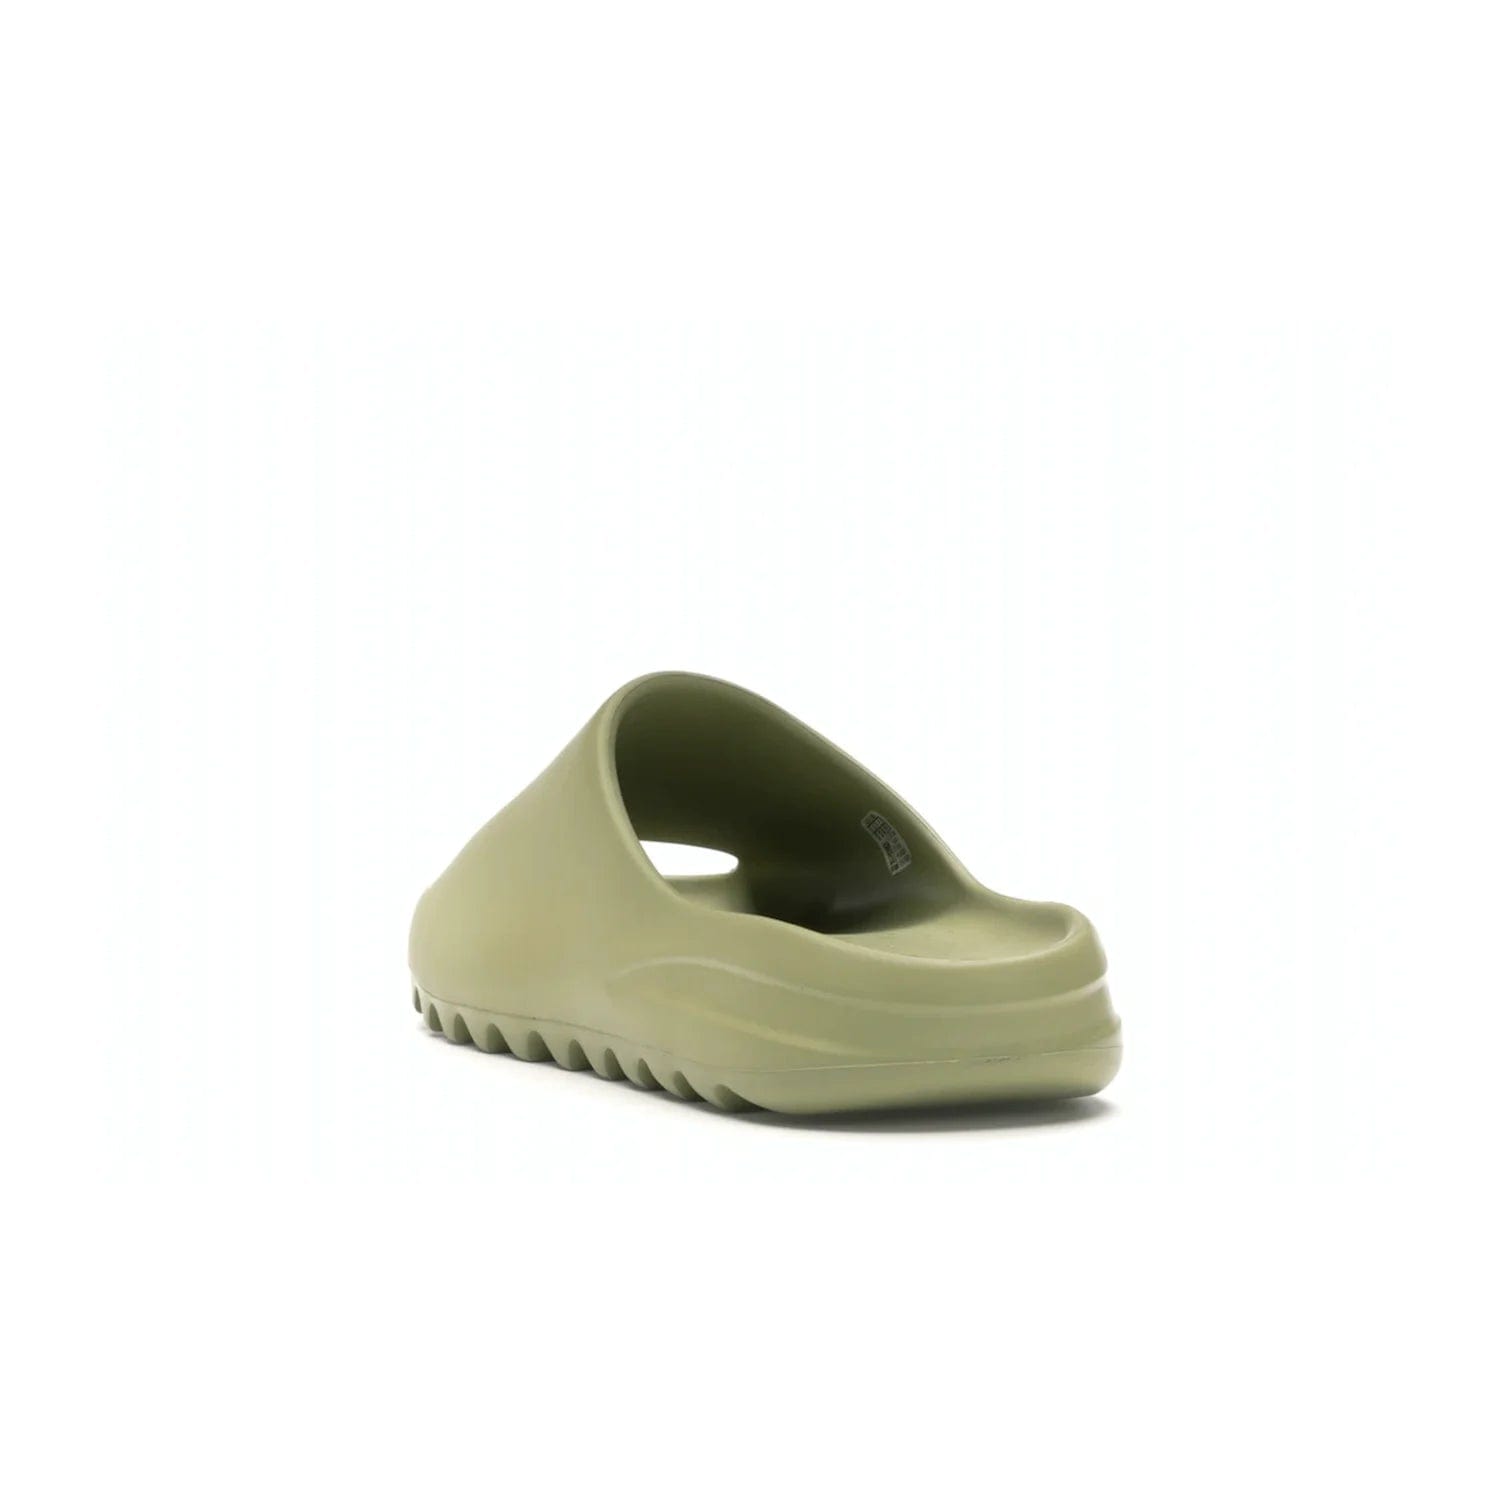 adidas Yeezy Slide Resin (2019/2021) - Image 26 - Only at www.BallersClubKickz.com - Step into fashion and function with the adidas Yeezy Slide Resin. Featuring a lightweight Resin EVA foam construction and an outsole with accentuated grooves for traction and support. The latest release is available in a Resin/Resin/Resin colorway, combining modern aesthetics and classic style. Step into style with the adidas Yeezy Slide Resin and be the trend-setter this season.